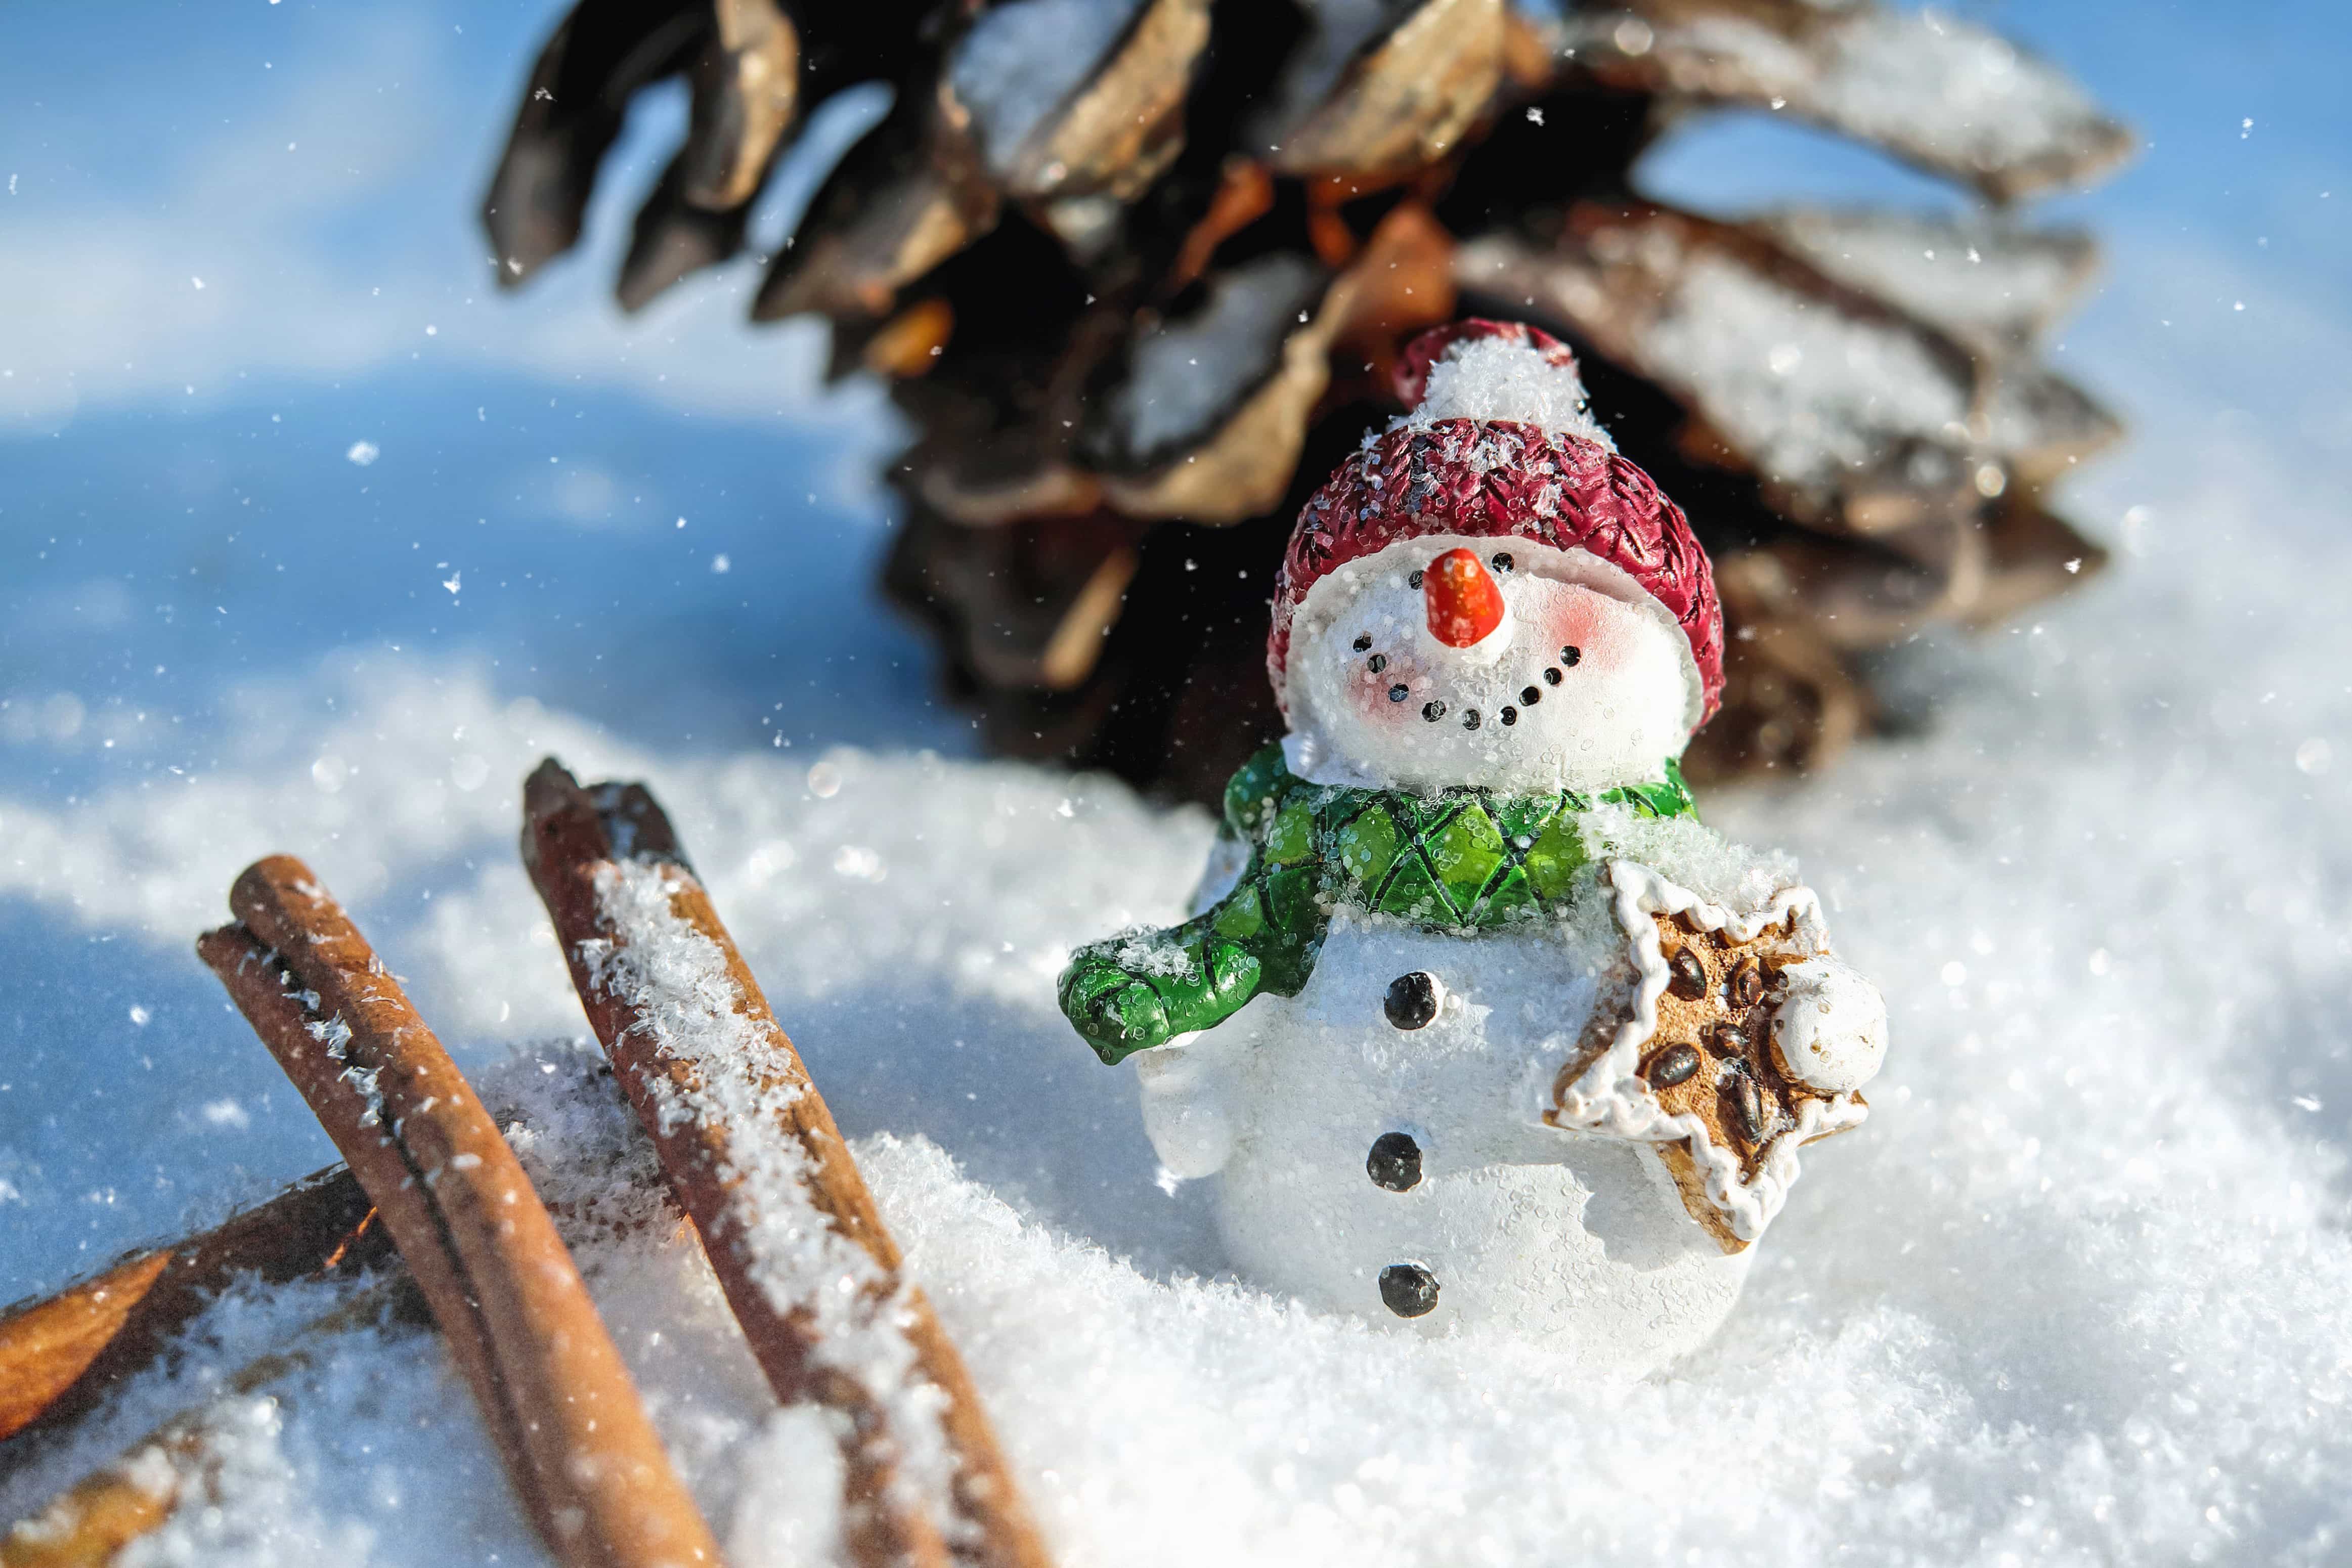 Free picture: snowman, snow, figure, hat, wood, cold, snowflake